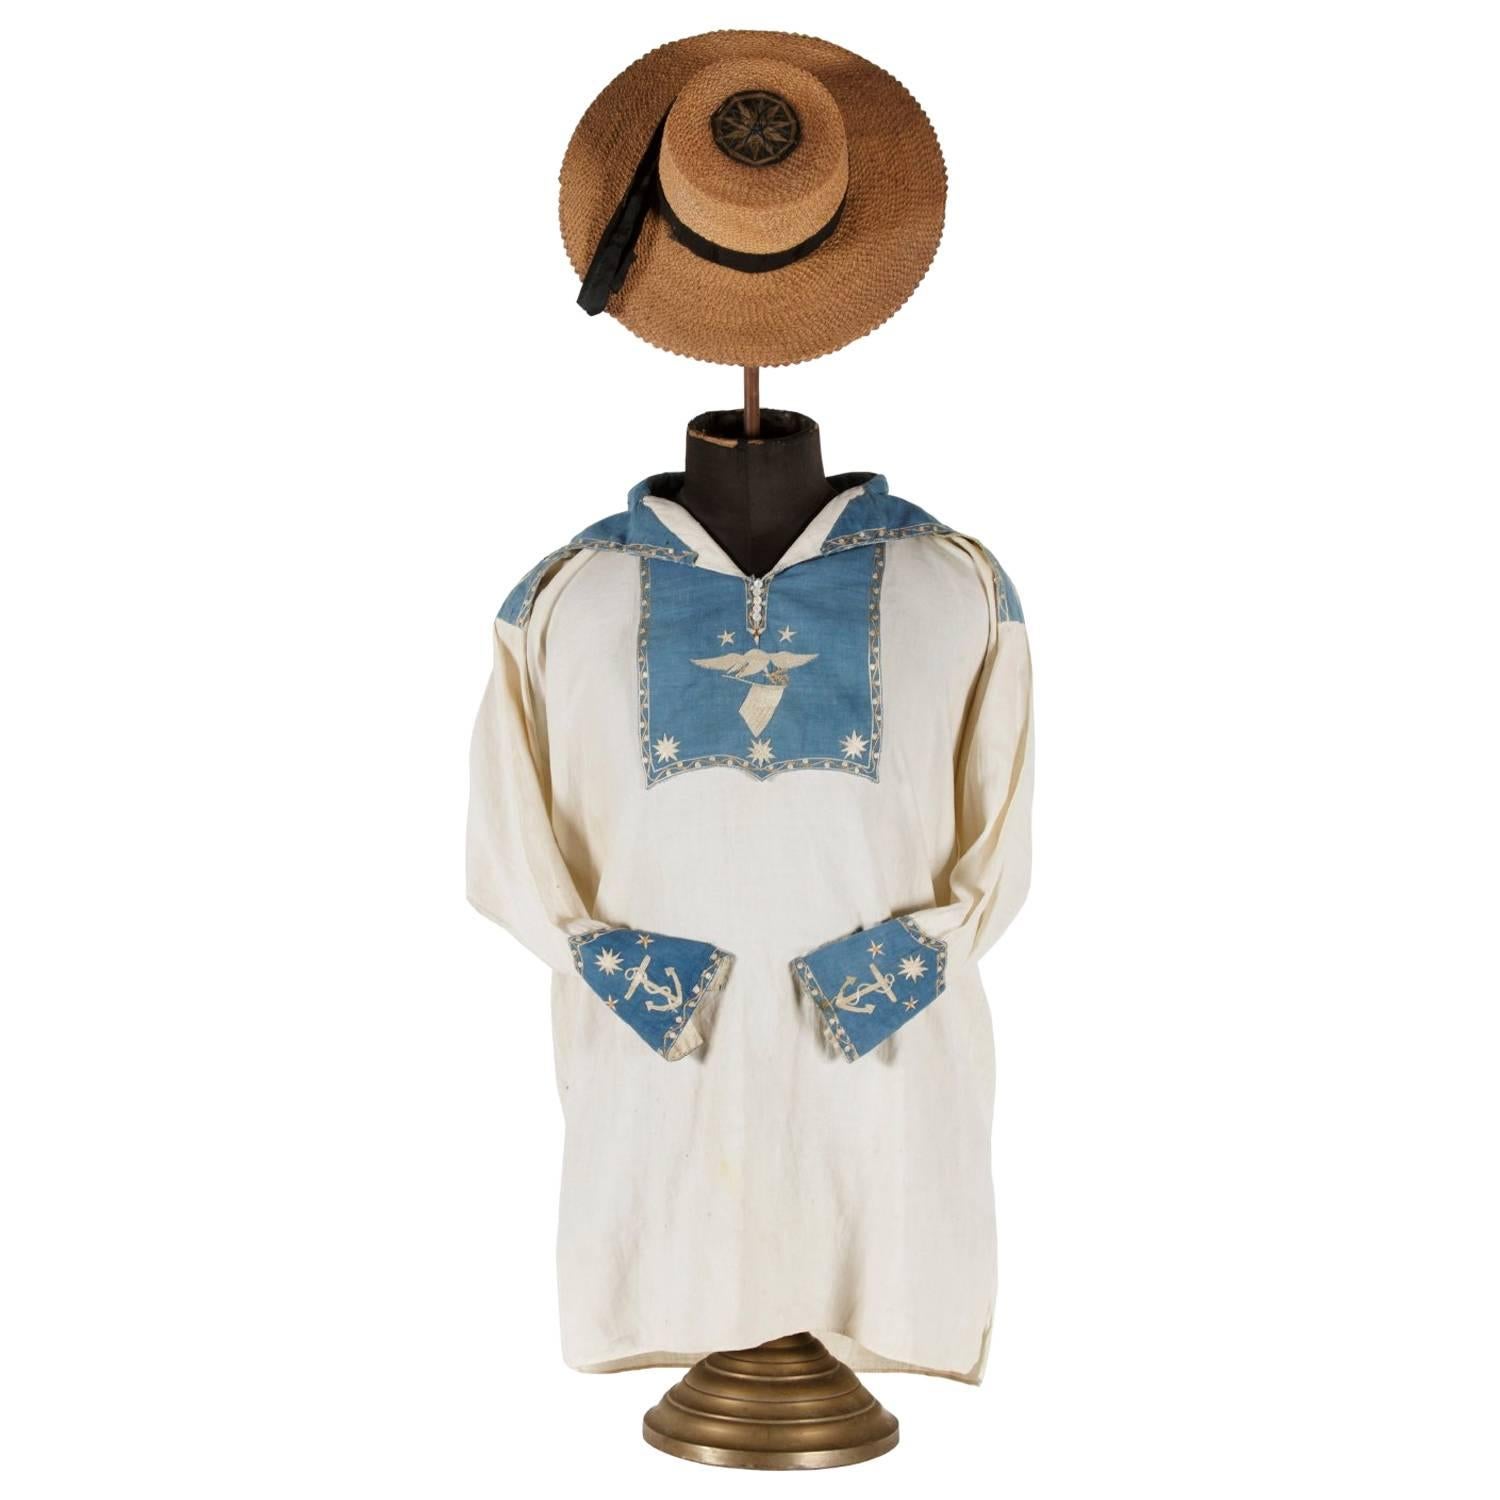 Navyman's Frock and Jack Tar Hat with Elaborate Patriotic Decoration